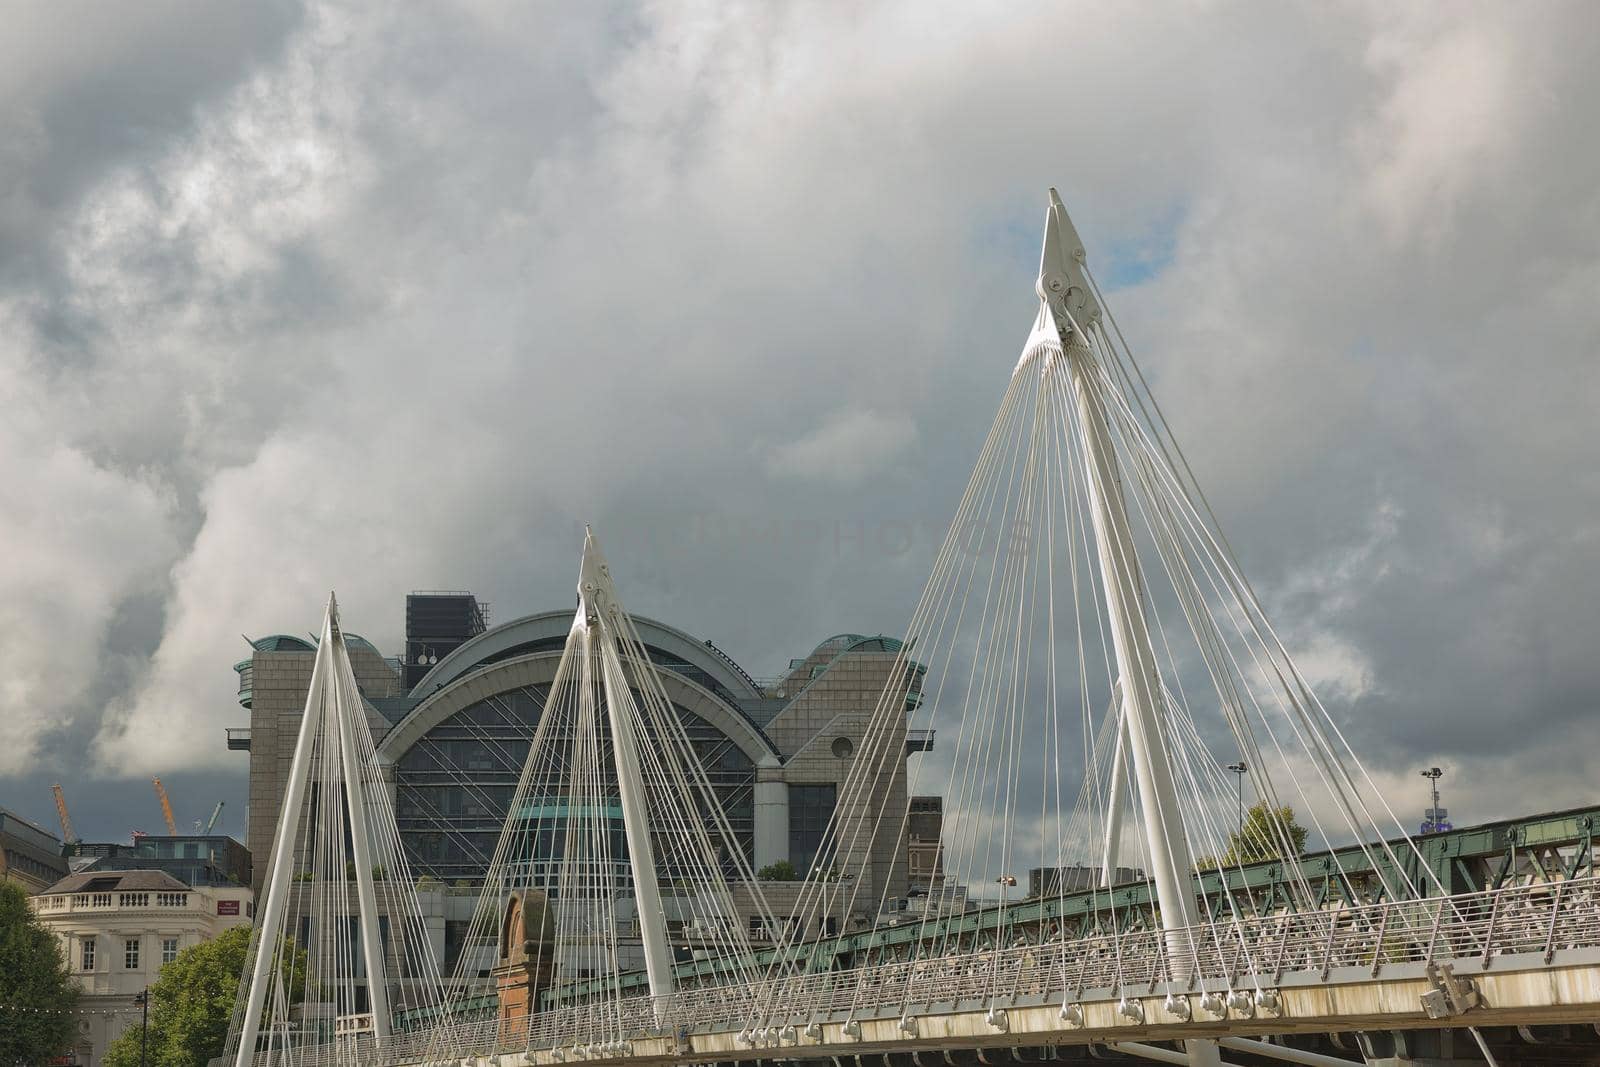 View of the Golden Jubilee Bridges and Charing Cross Station from the South Shore of the River Thames in London on a cloudy Summer day by wondry